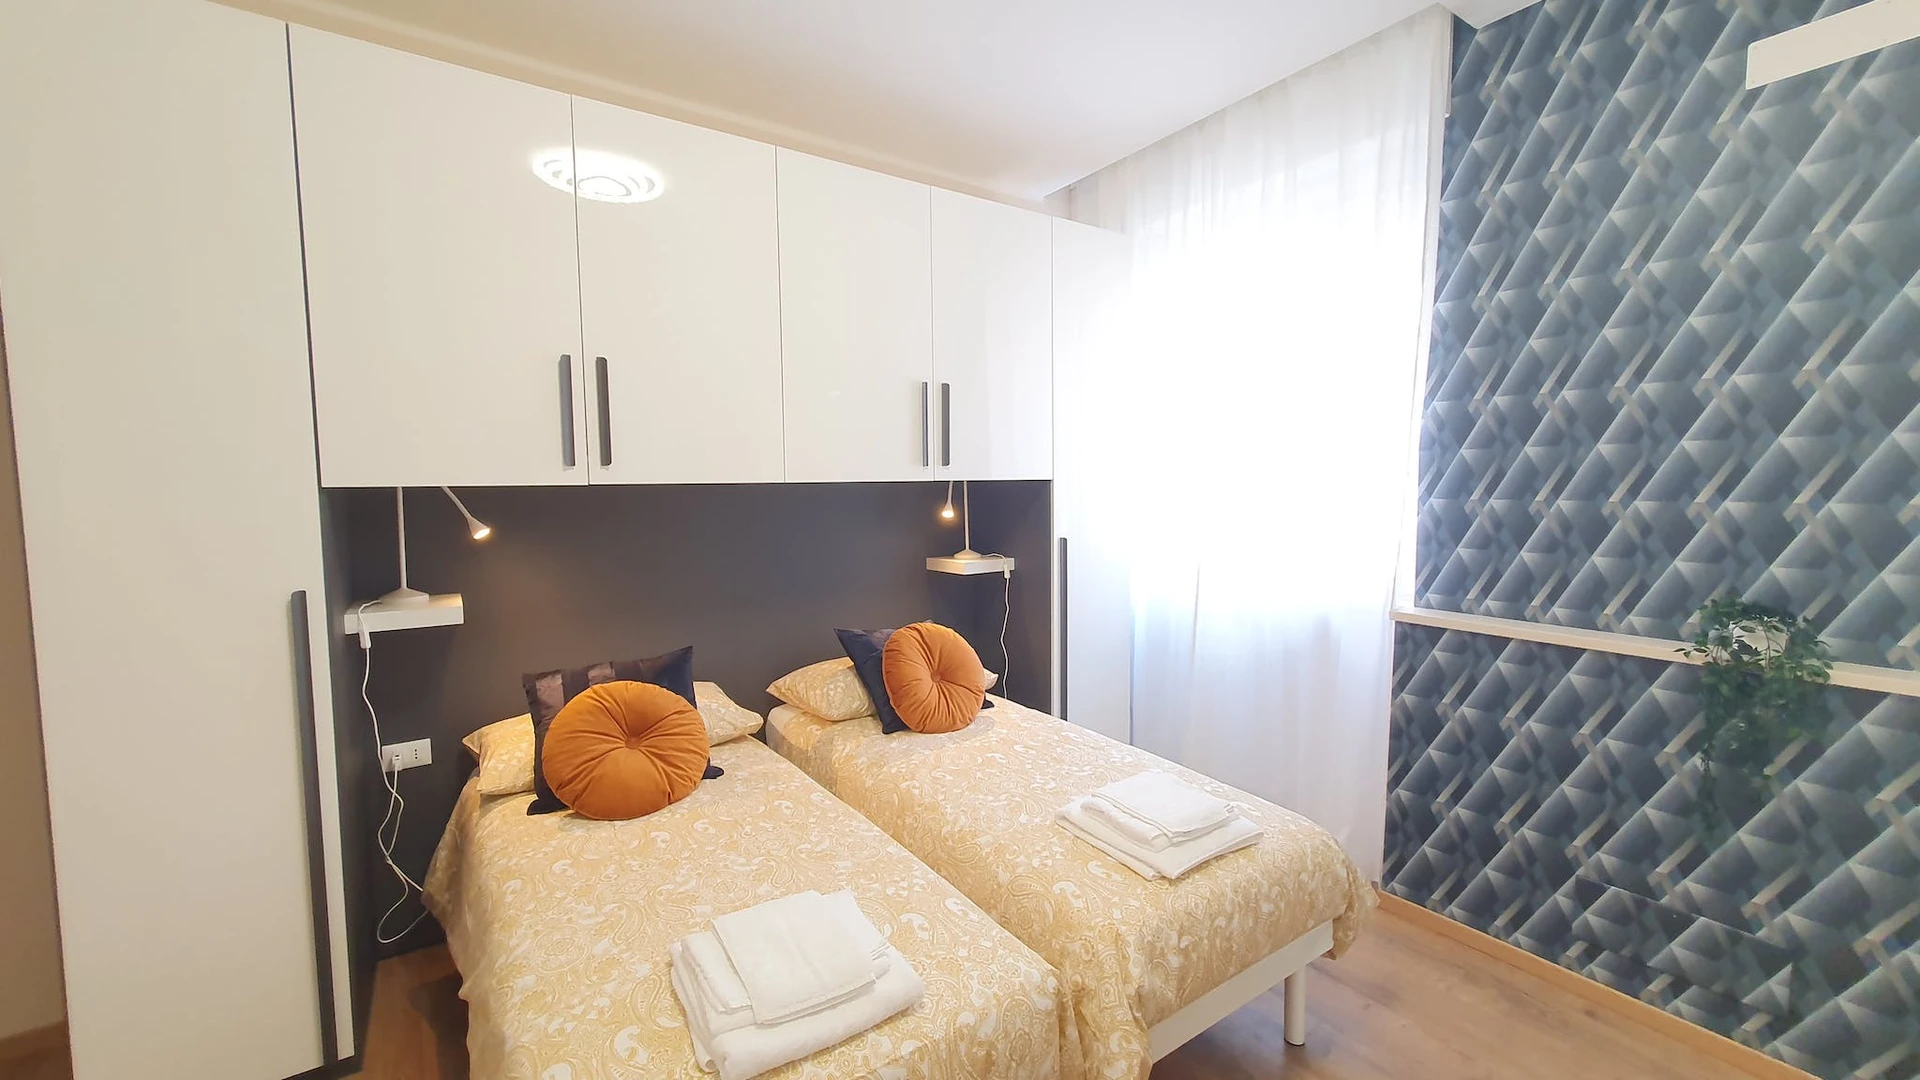 Modern and bright flat in Forlì